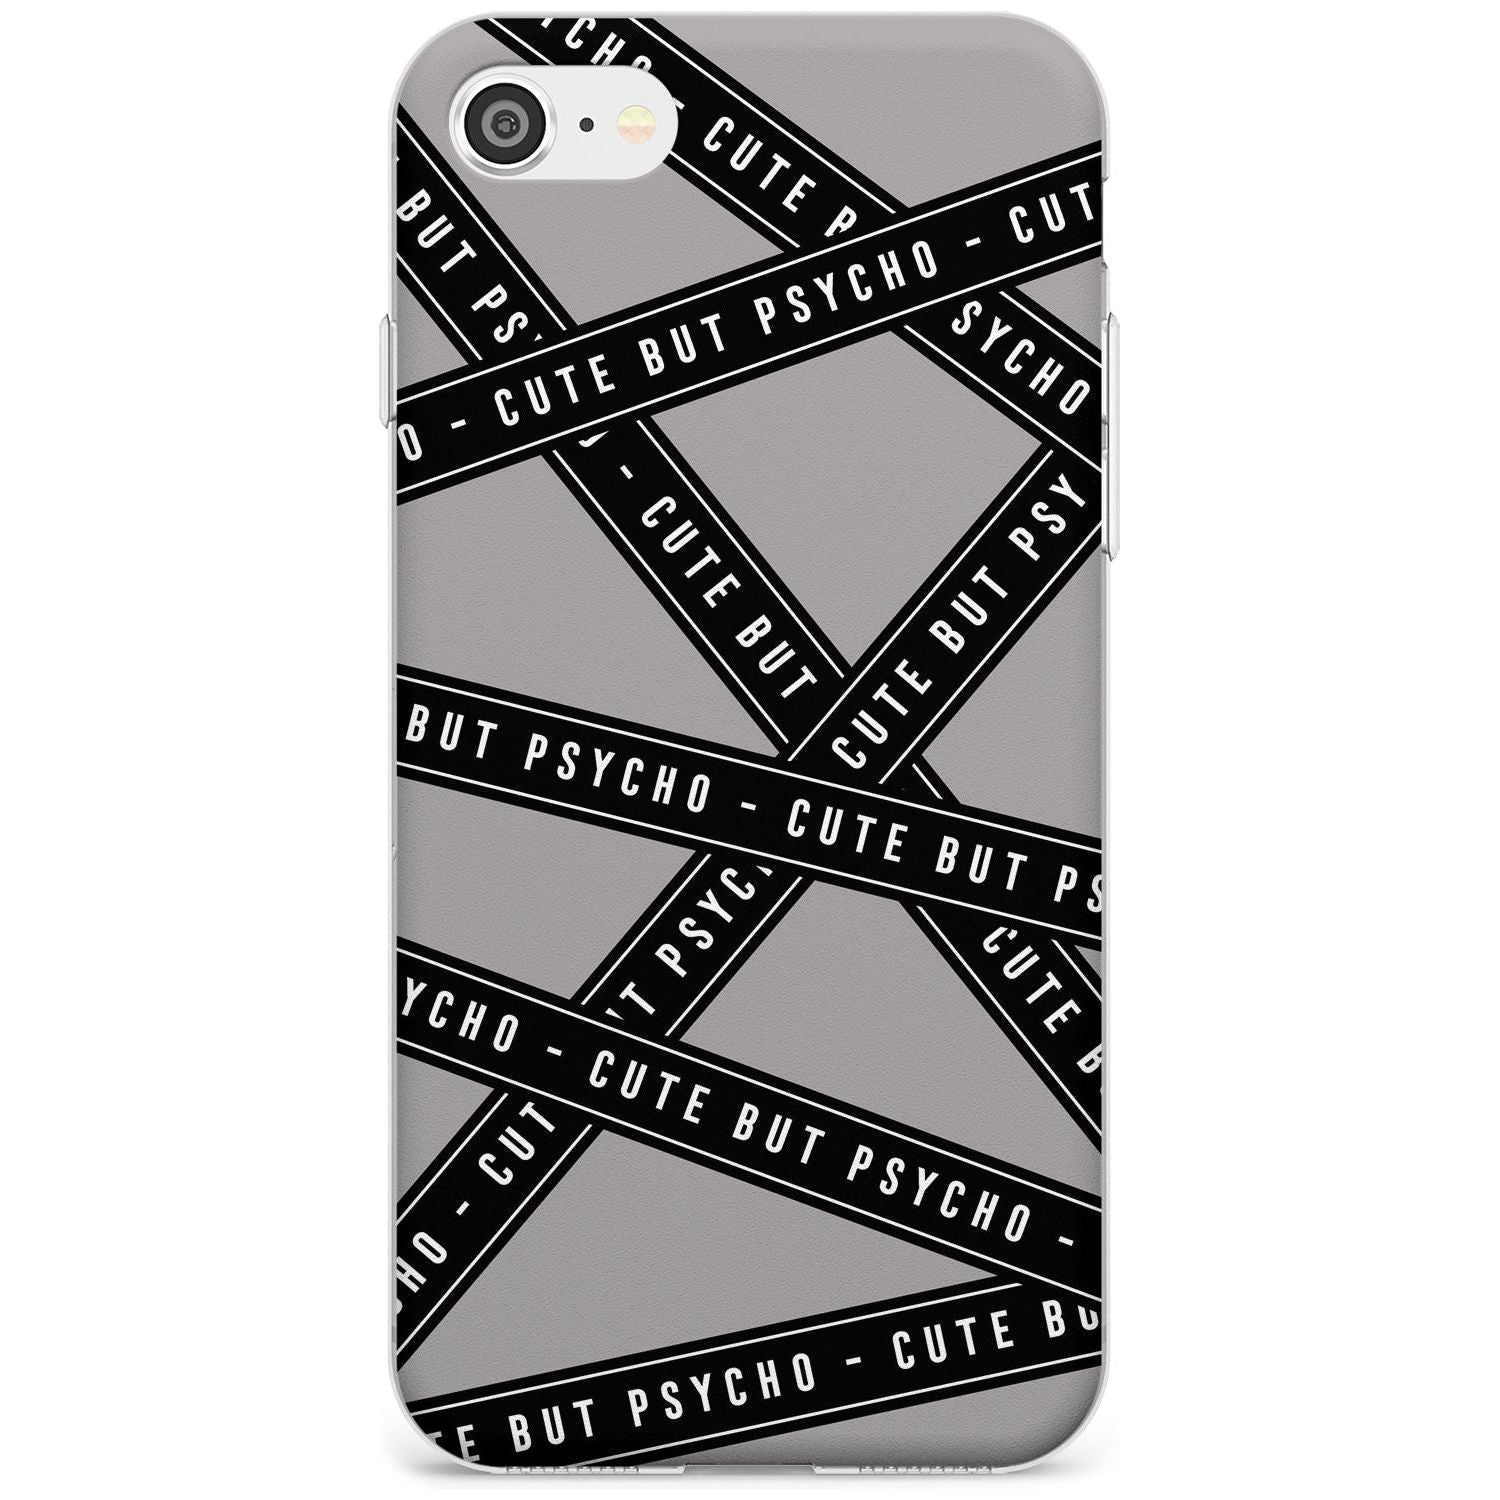 Caution Tape Phrases Cute But Psycho Slim TPU Phone Case for iPhone SE 8 7 Plus